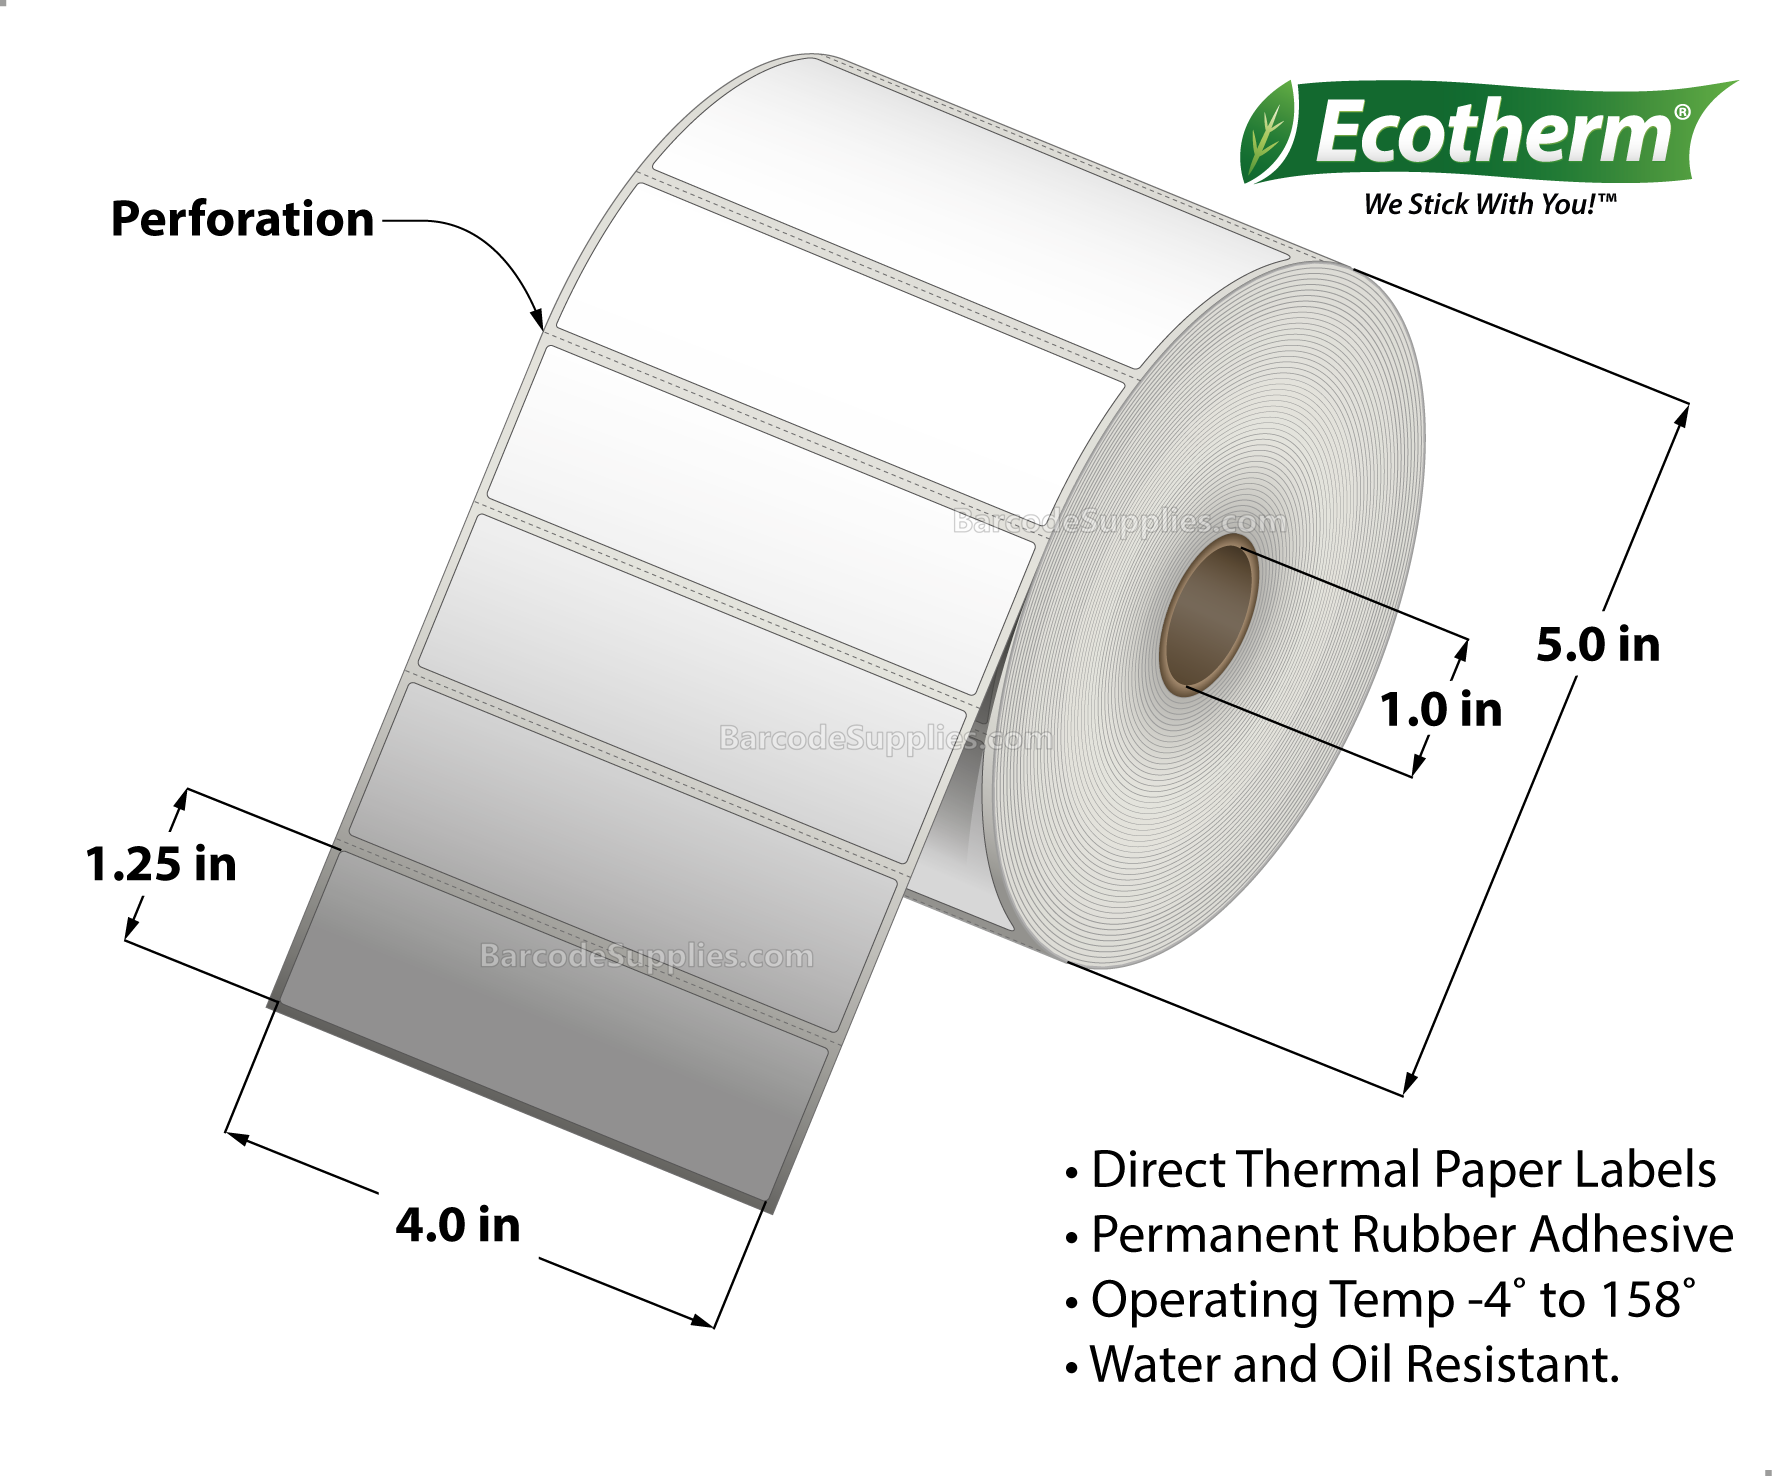 4 x 1.25 Direct Thermal White Labels With Rubber Adhesive - Perforated - 2100 Labels Per Roll - Carton Of 6 Rolls - 12600 Labels Total - MPN: ECOTHERM15147-6